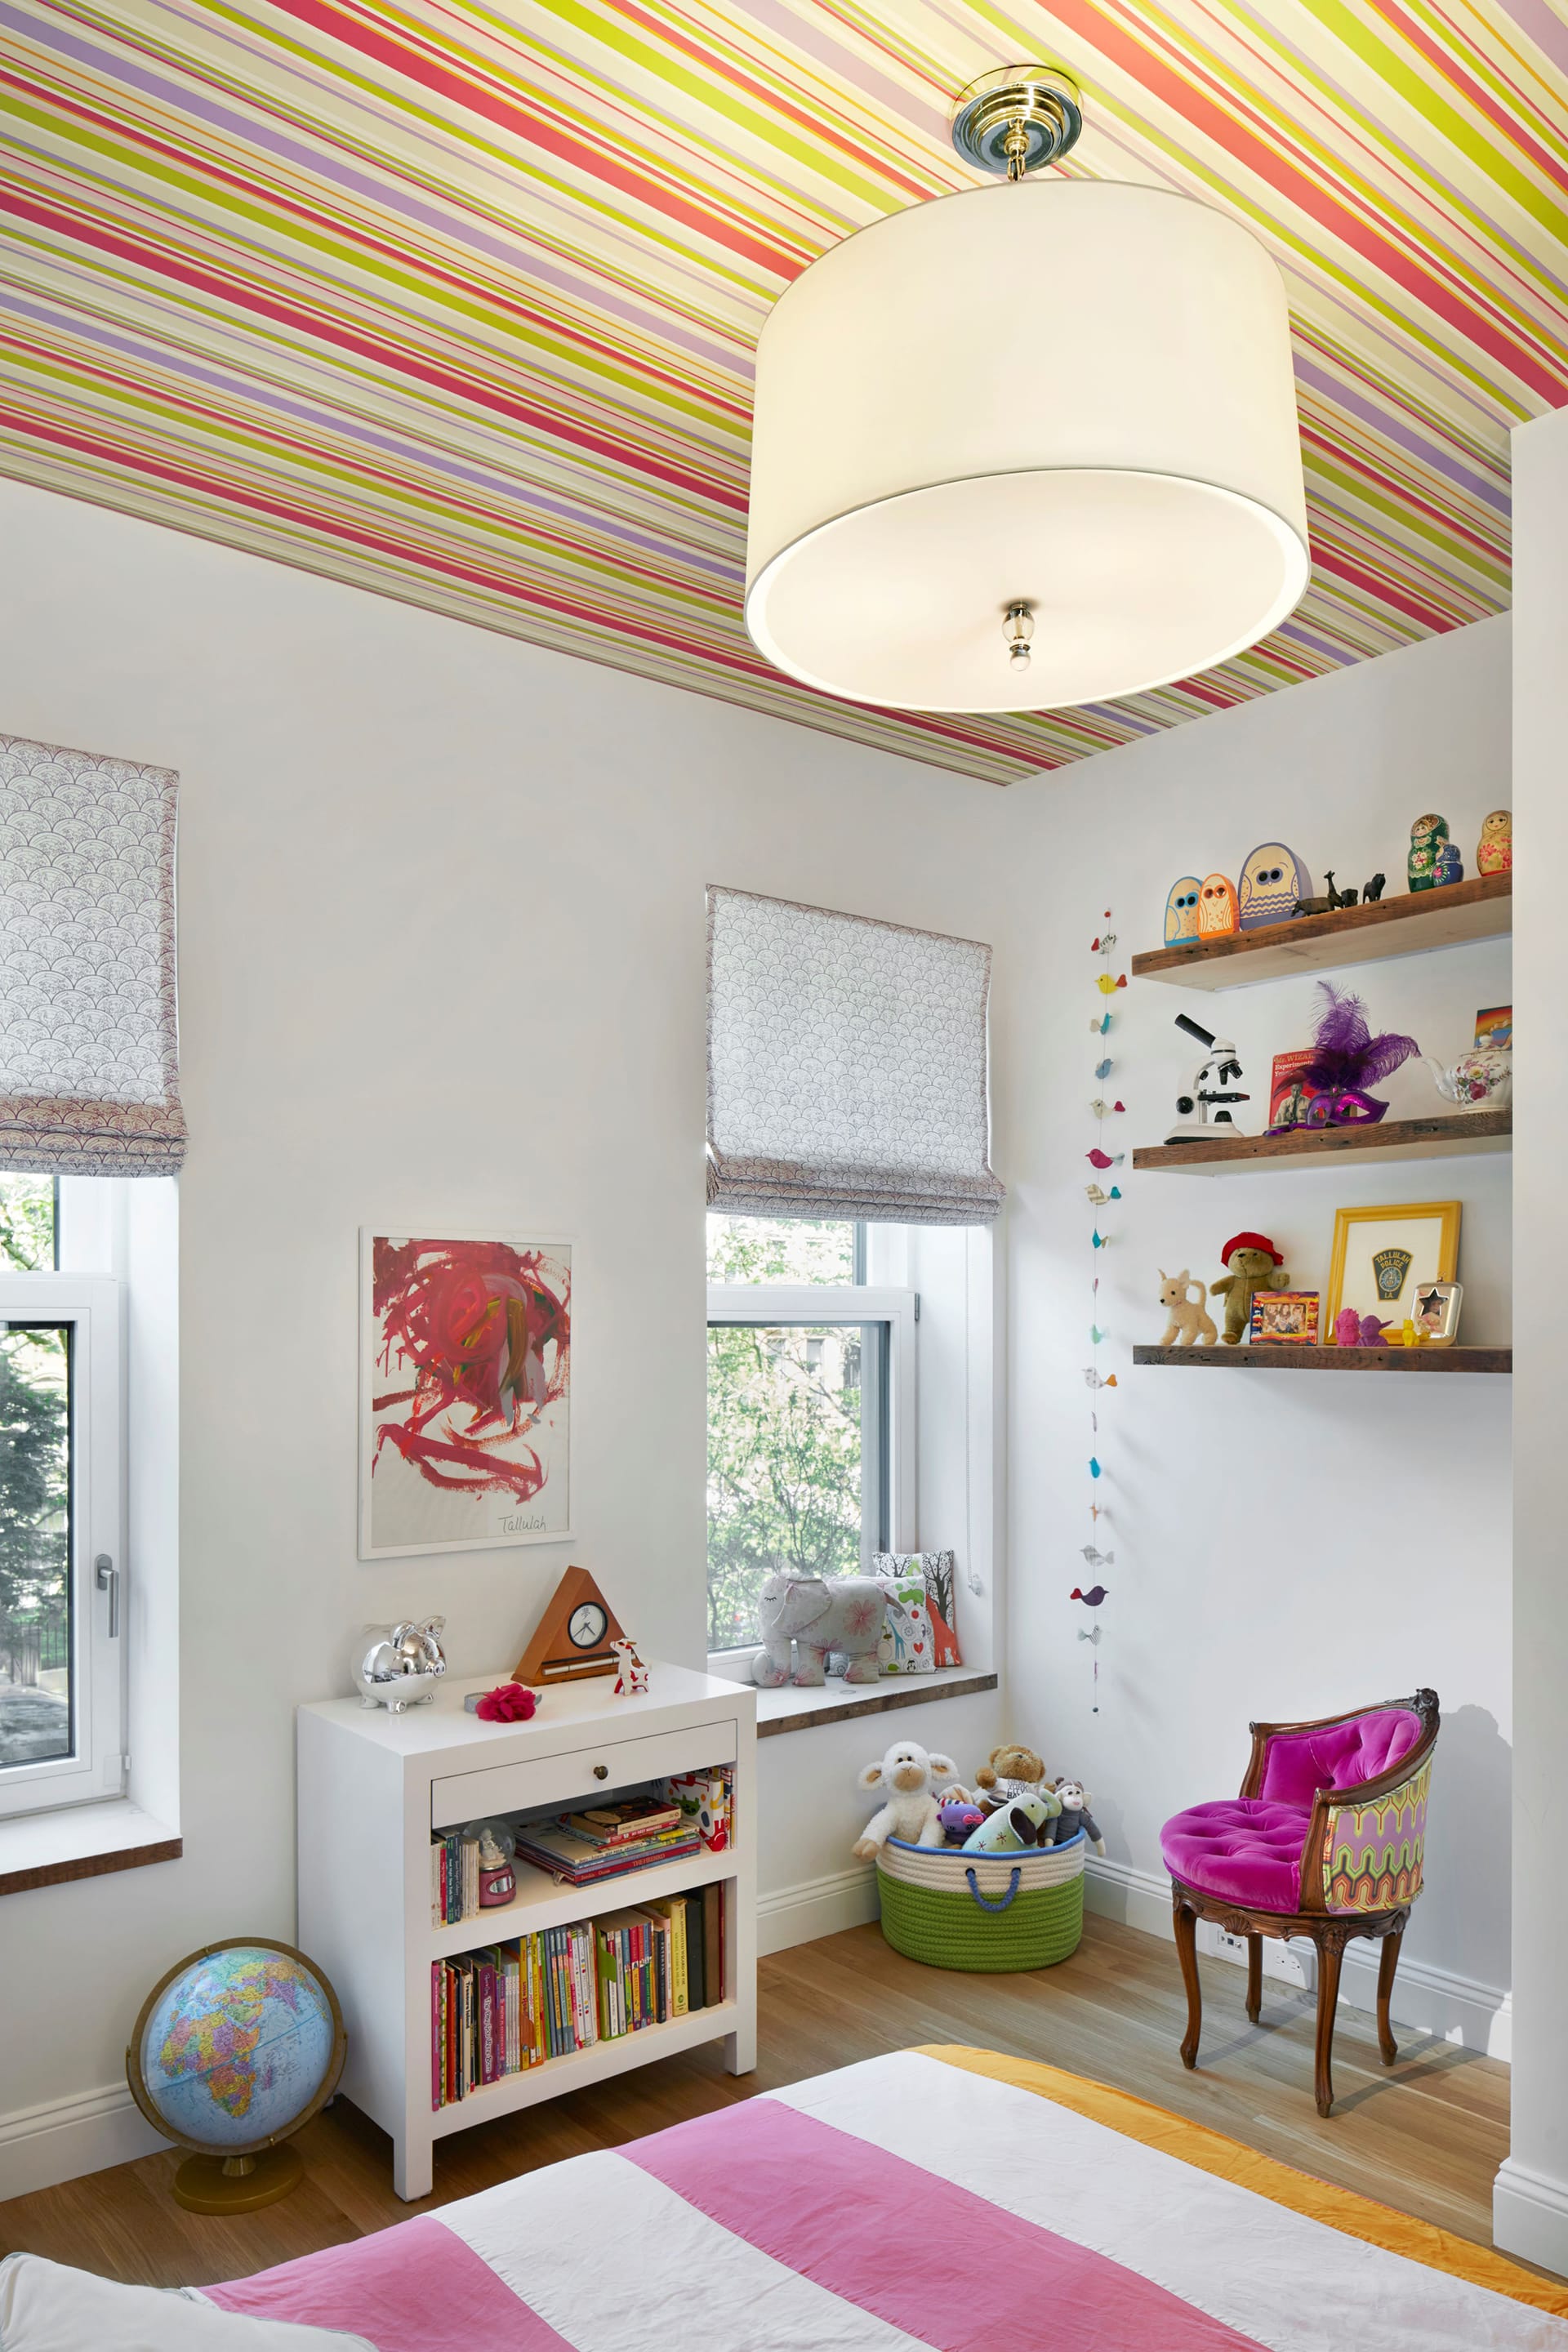 Corner of a child's bedroom with striped wallpaper on the ceiling, suspended bookshelves, Roman shades, and a white and pink striped comforter at the bottom of the frame.